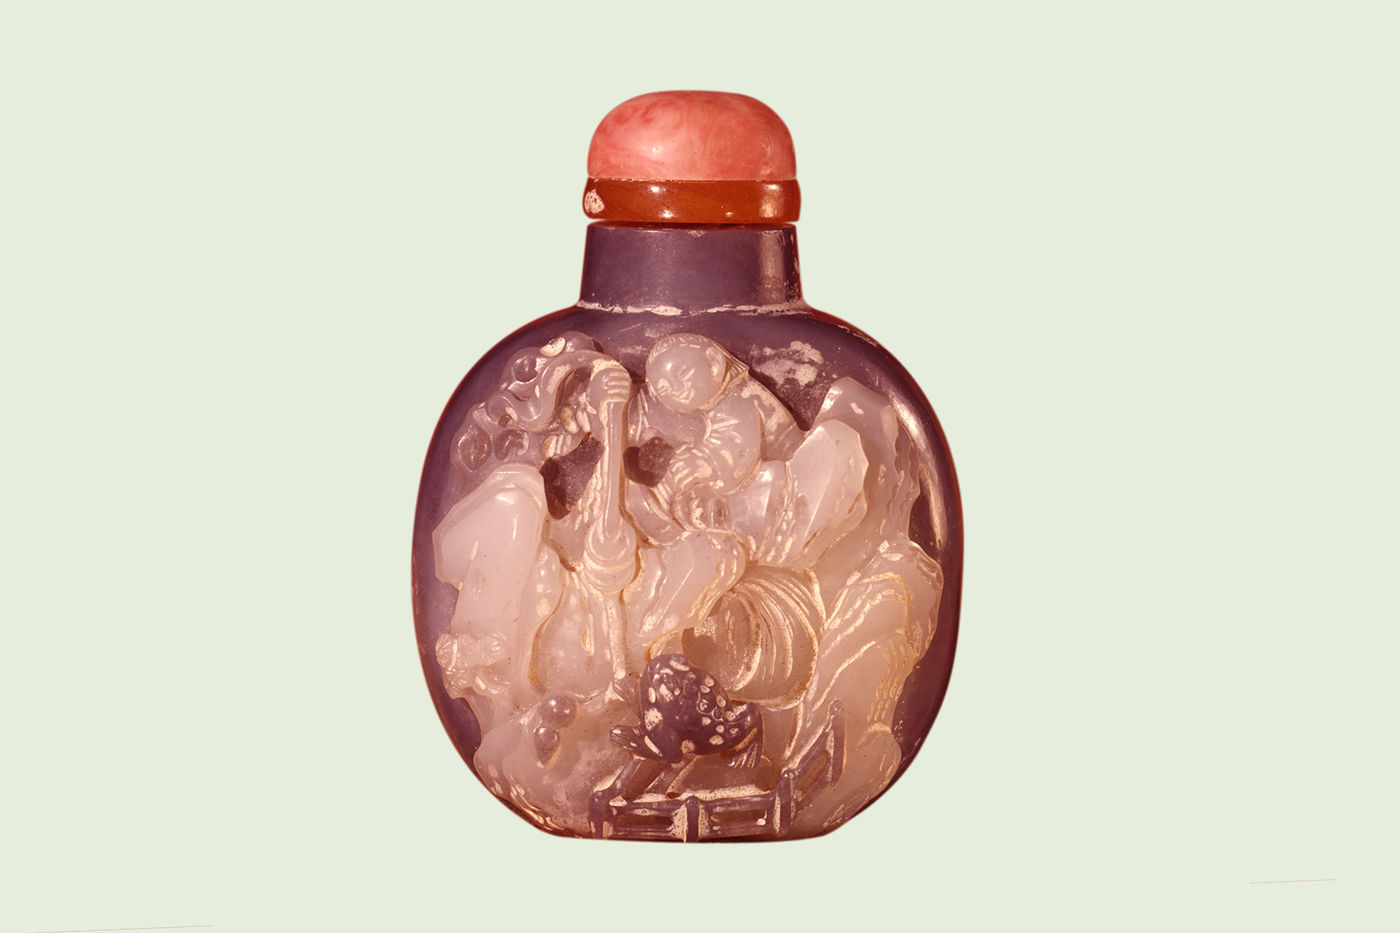 In the Qing period (AD 1644–1911), decorated snuff bottles emerged as a new art form. Snuff, a powdered form of tobacco, became popular in China during the 1600s.